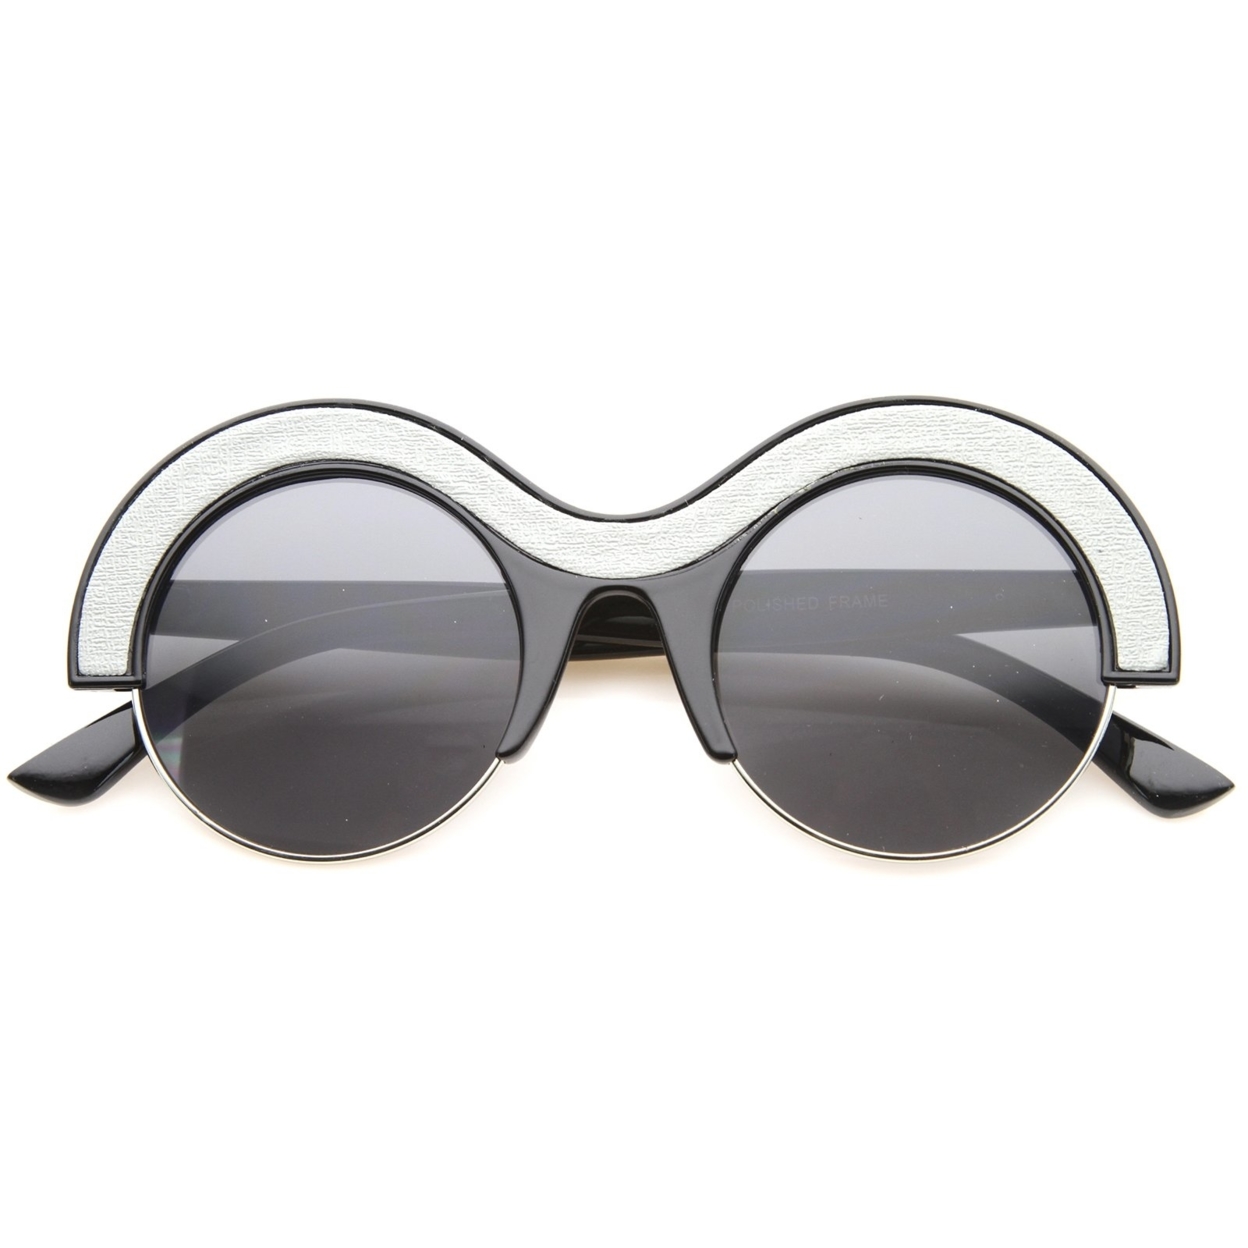 Womens Round Sunglasses With UV400 Protected Mirrored Lens - Black-Grey / Midnight